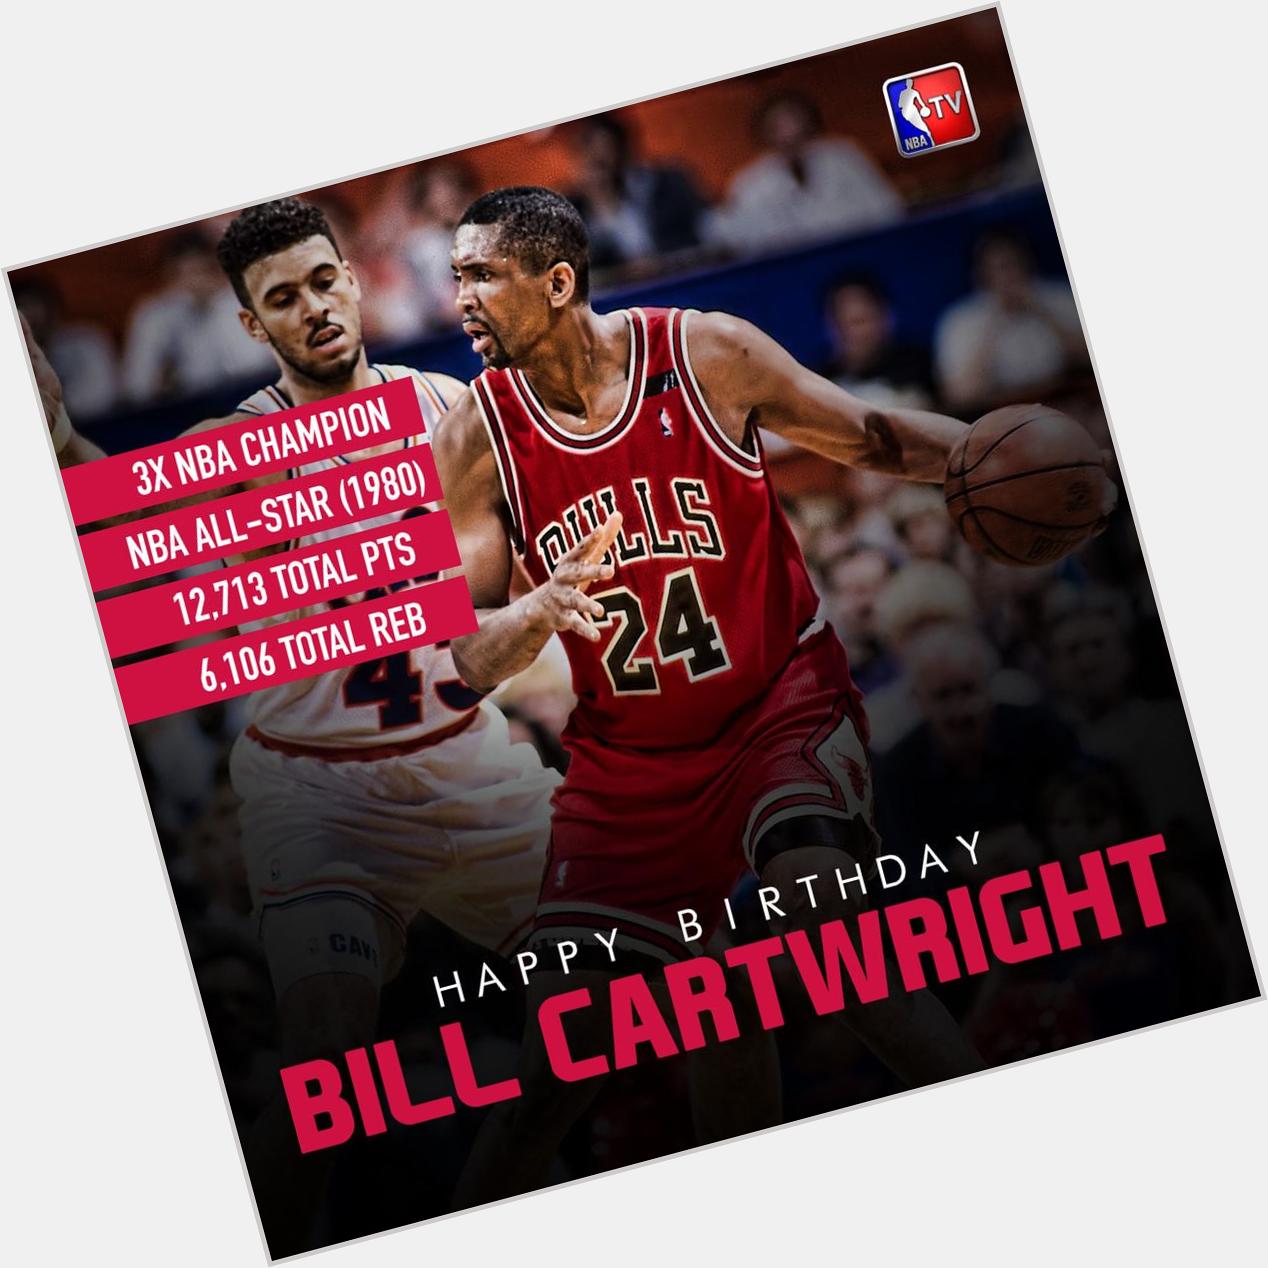  : Join us in wishing Bill Cartwright a Happy Birthday!  